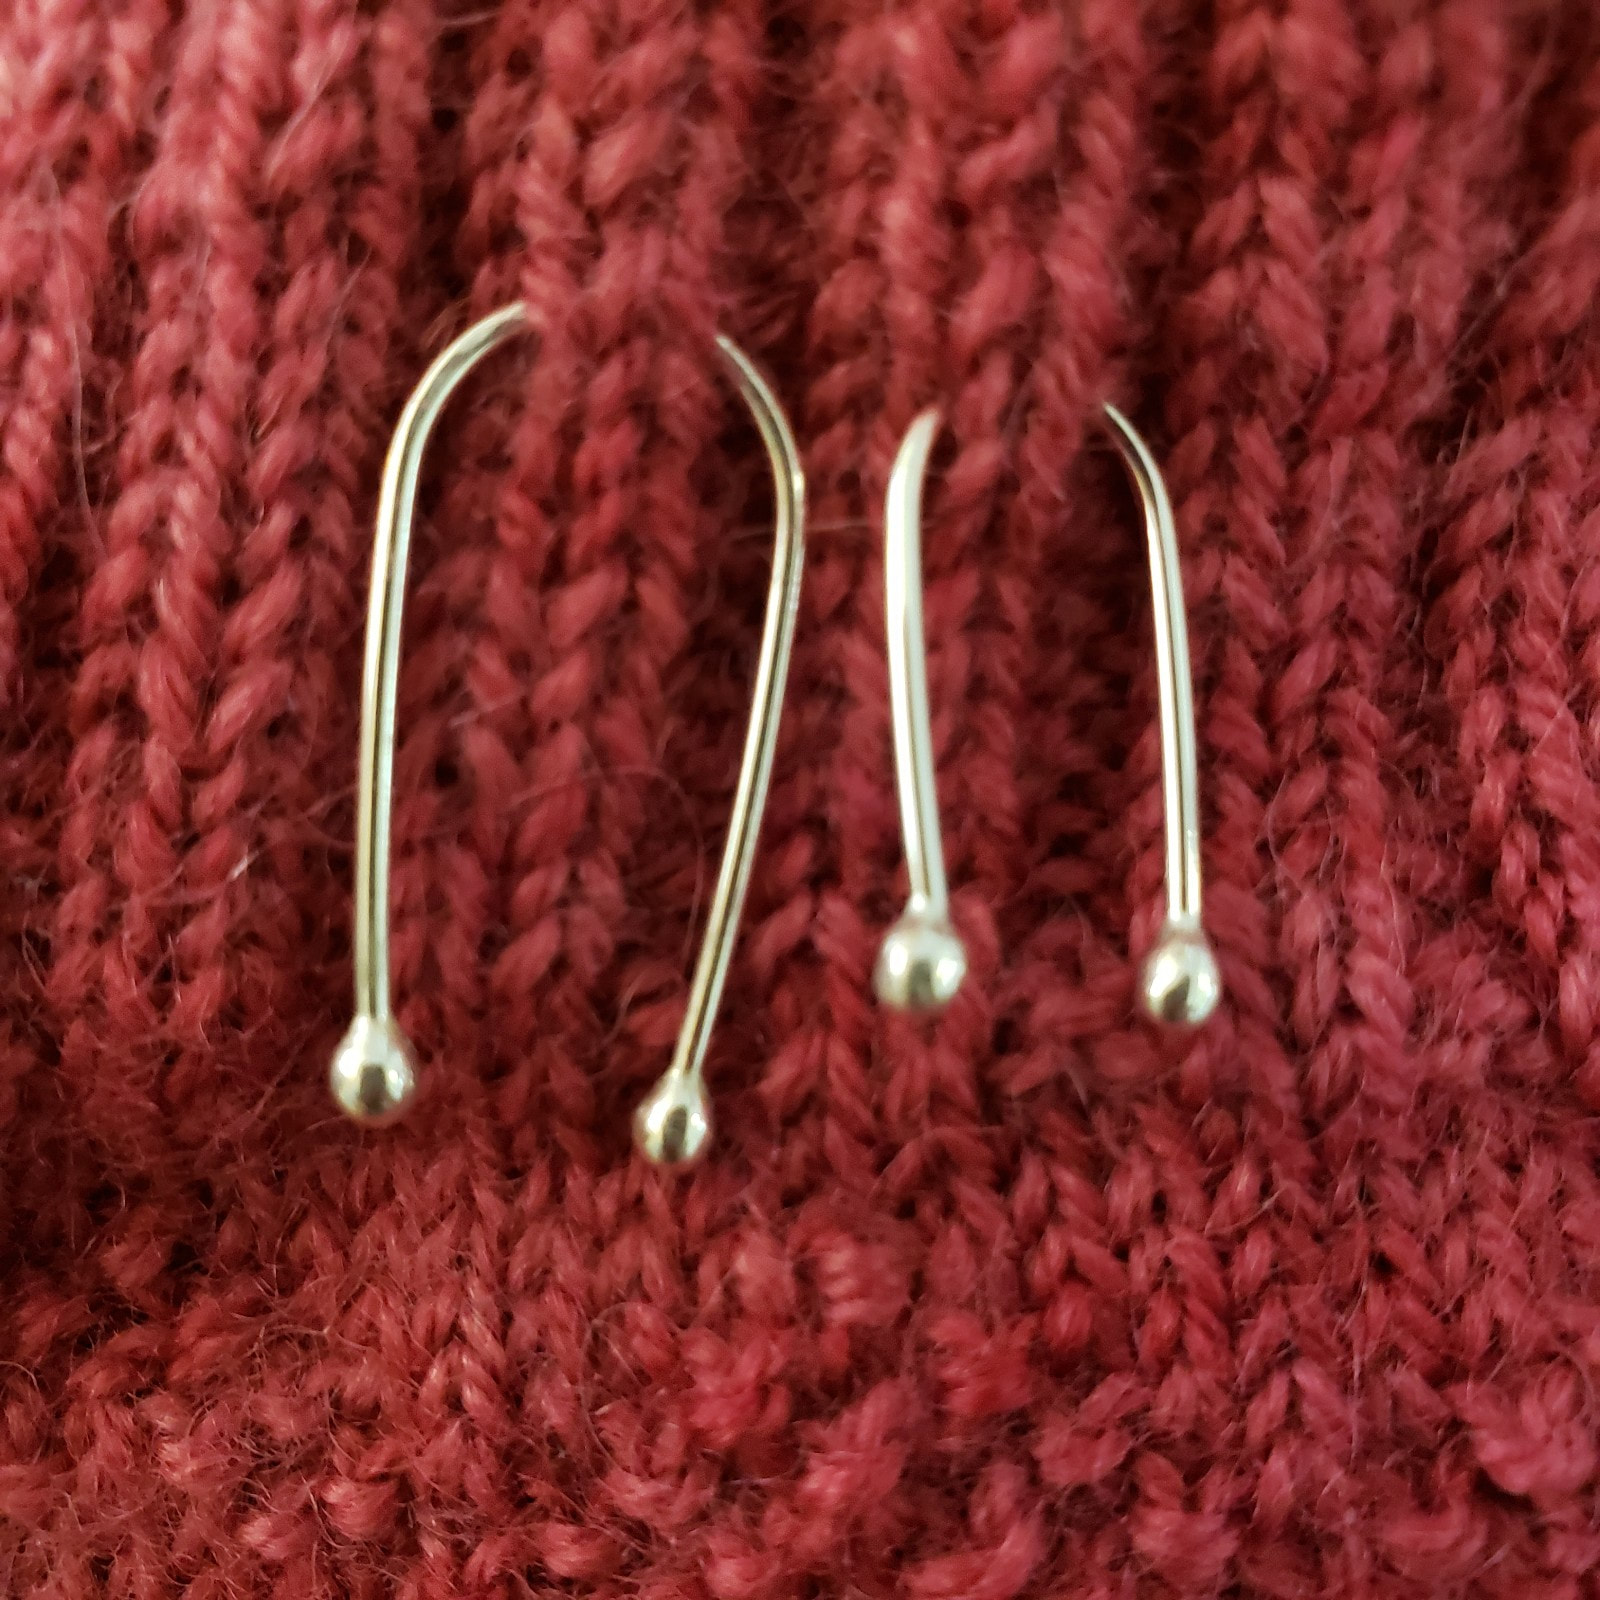 Sterling silver stitch markers for knitting and crochet